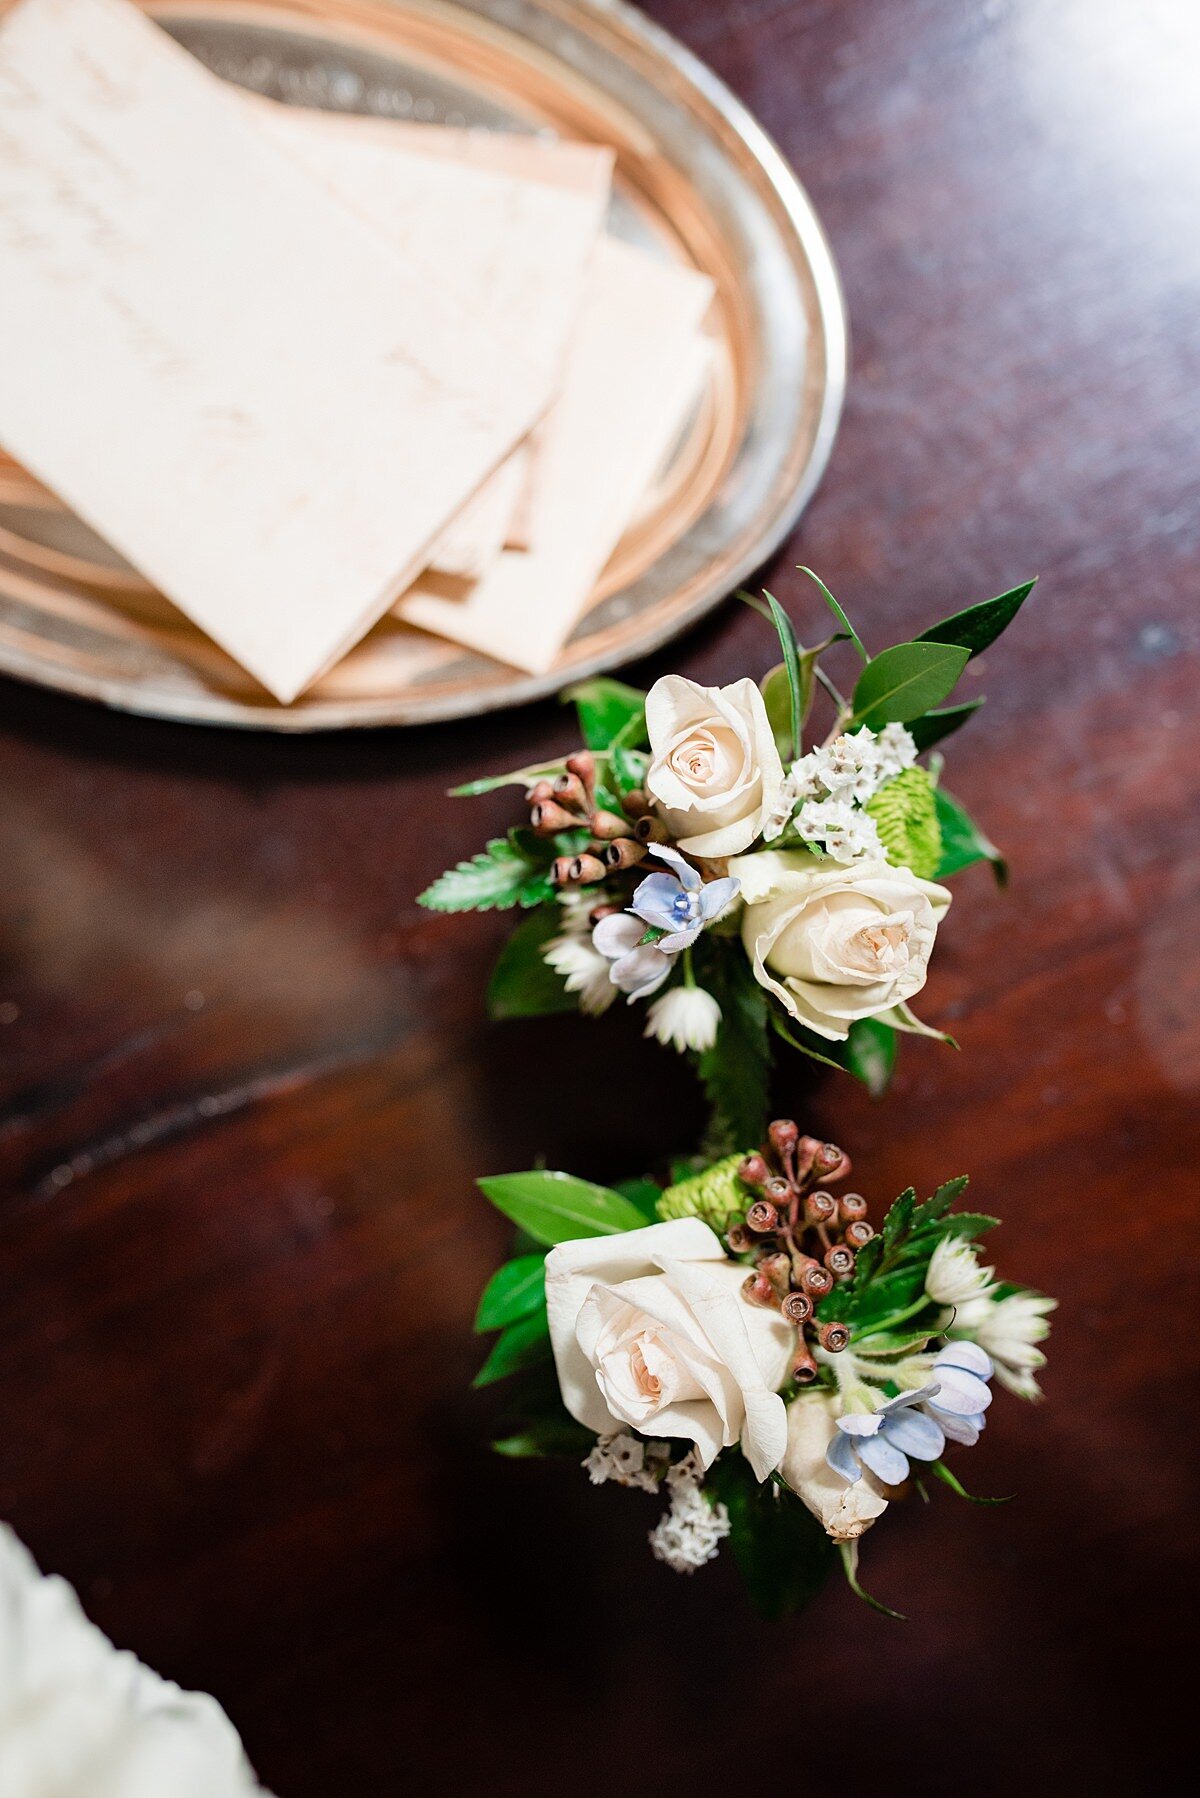 two white rose boutonnieres with berries and dusty miller. Two groomsmen boutonnieres.